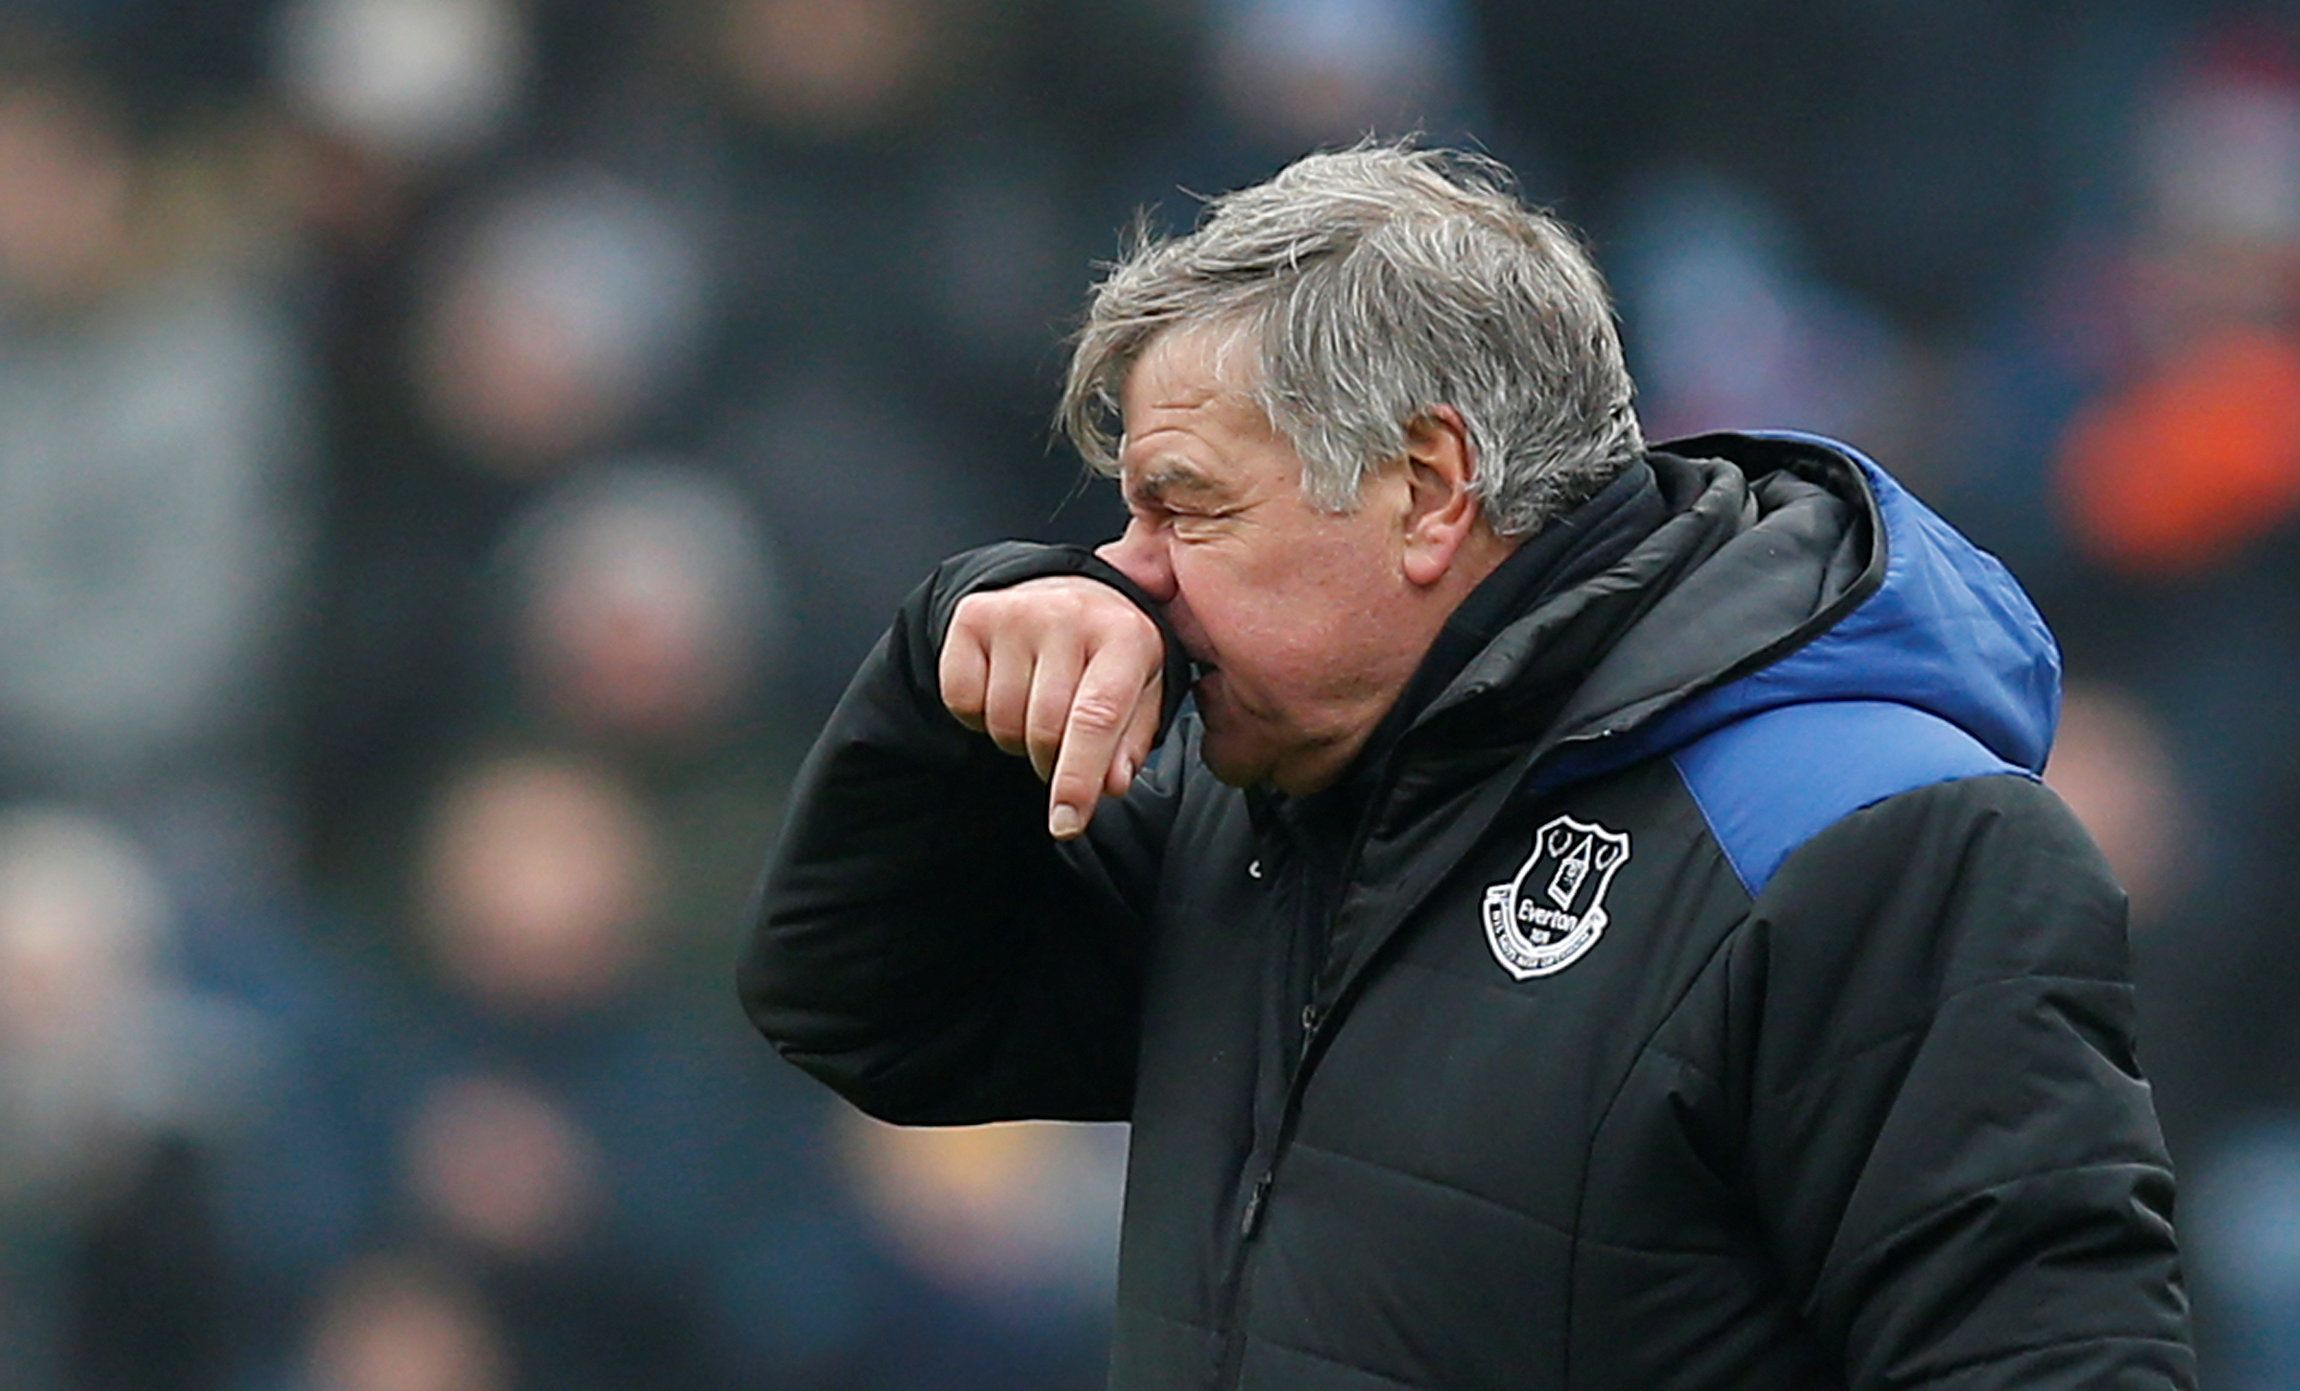 Soccer Football - Premier League - Burnley vs Everton - Turf Moor, Burnley, Britain - March 3, 2018   Everton manager Sam Allardyce looks dejected after the match   REUTERS/Andrew Yates    EDITORIAL USE ONLY. No use with unauthorized audio, video, data, fixture lists, club/league logos or 